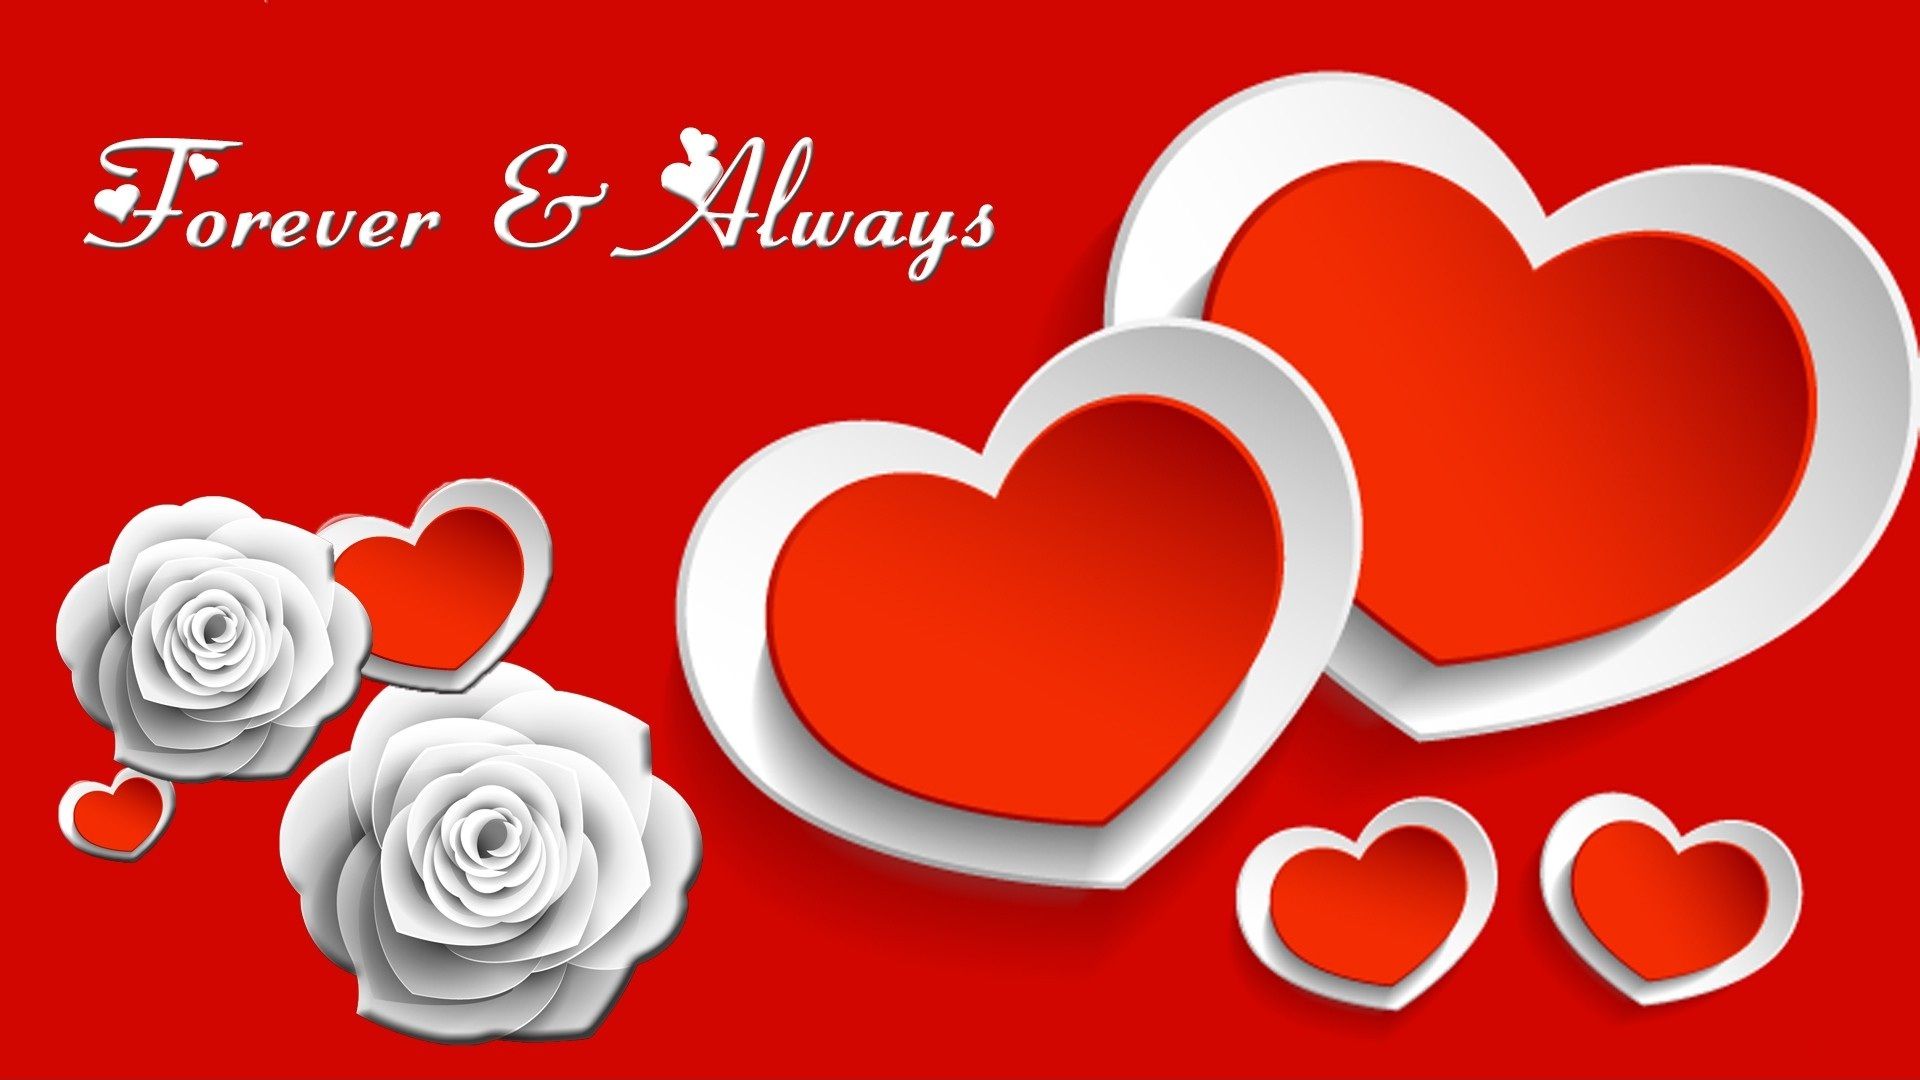 Love Forever And Always Wallpaper Hd Wallpaper Backgrounds Download